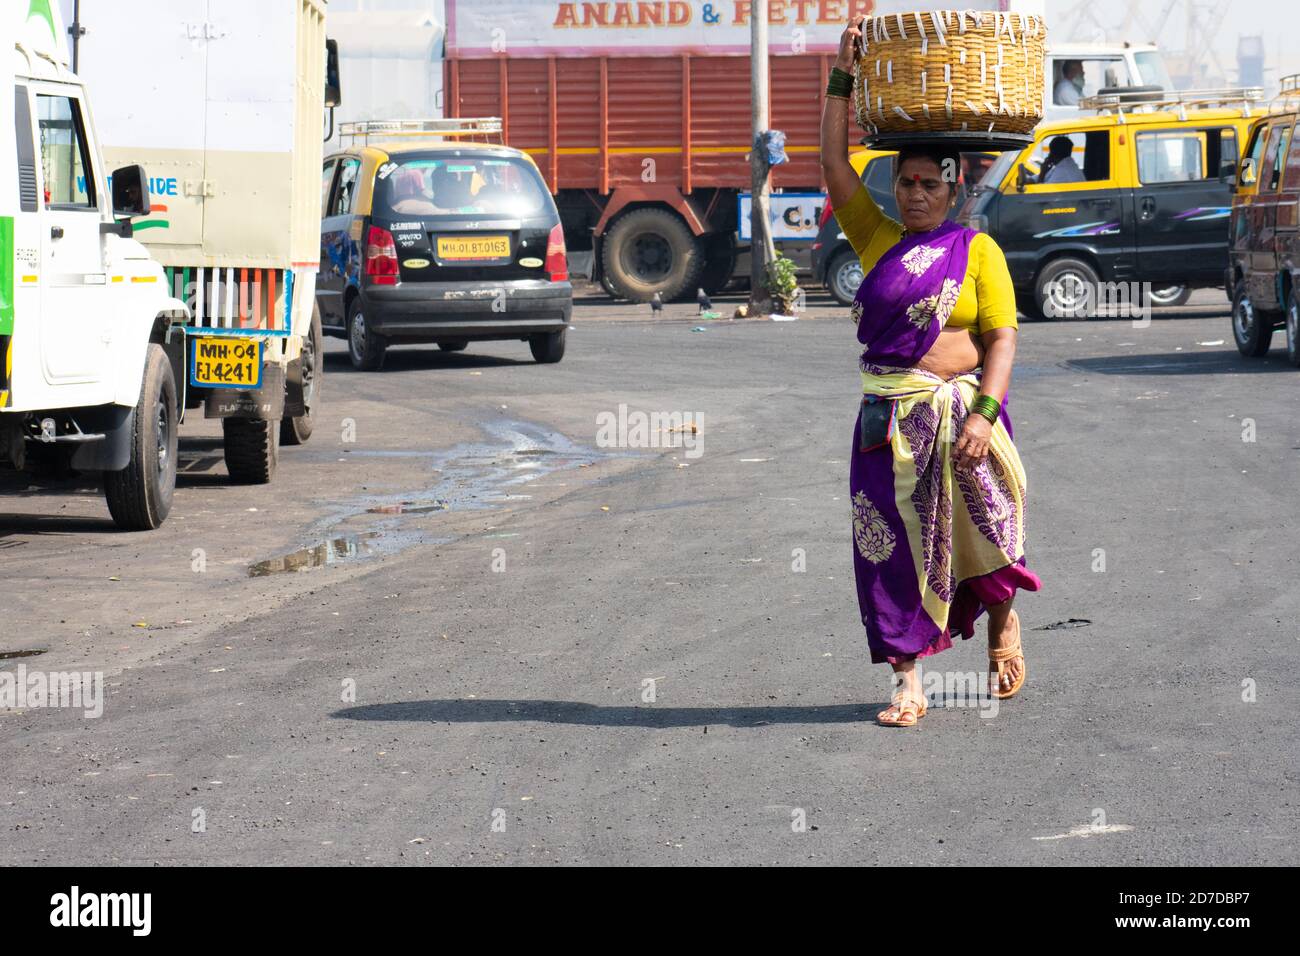 Mumbai, India - March 23, 2019: Mid-aged woman in traditional saree carrying a bamboo basket on her head and crossing near St.Michael's Church. Stock Photo